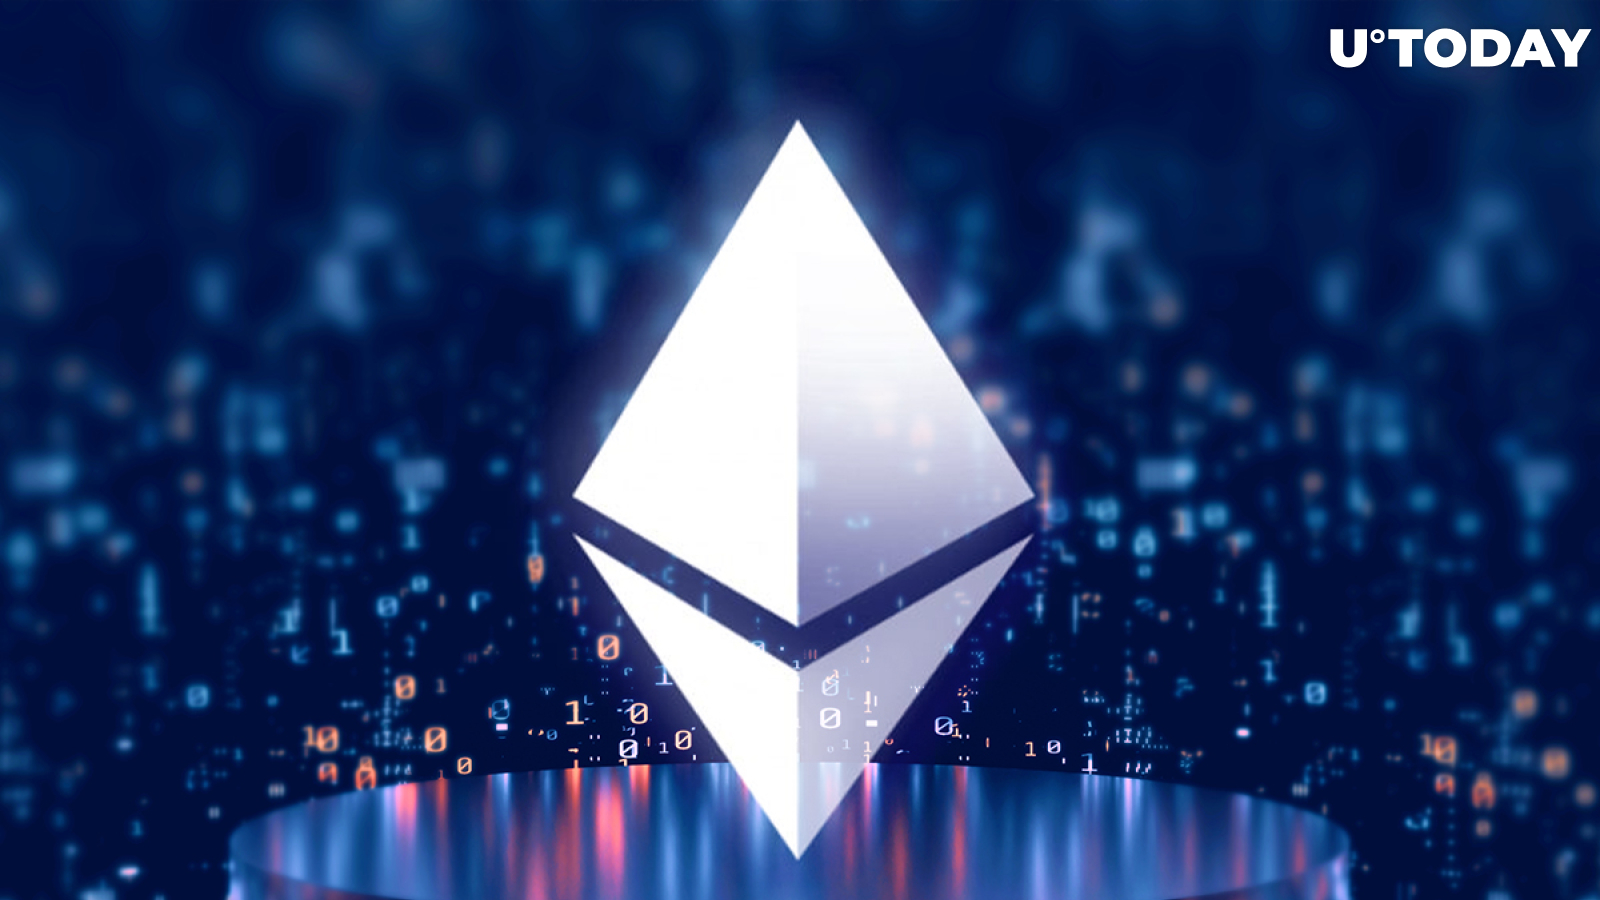 Ethereum Options Max Pain Price Is Now at $2,800 After 16% Retrace